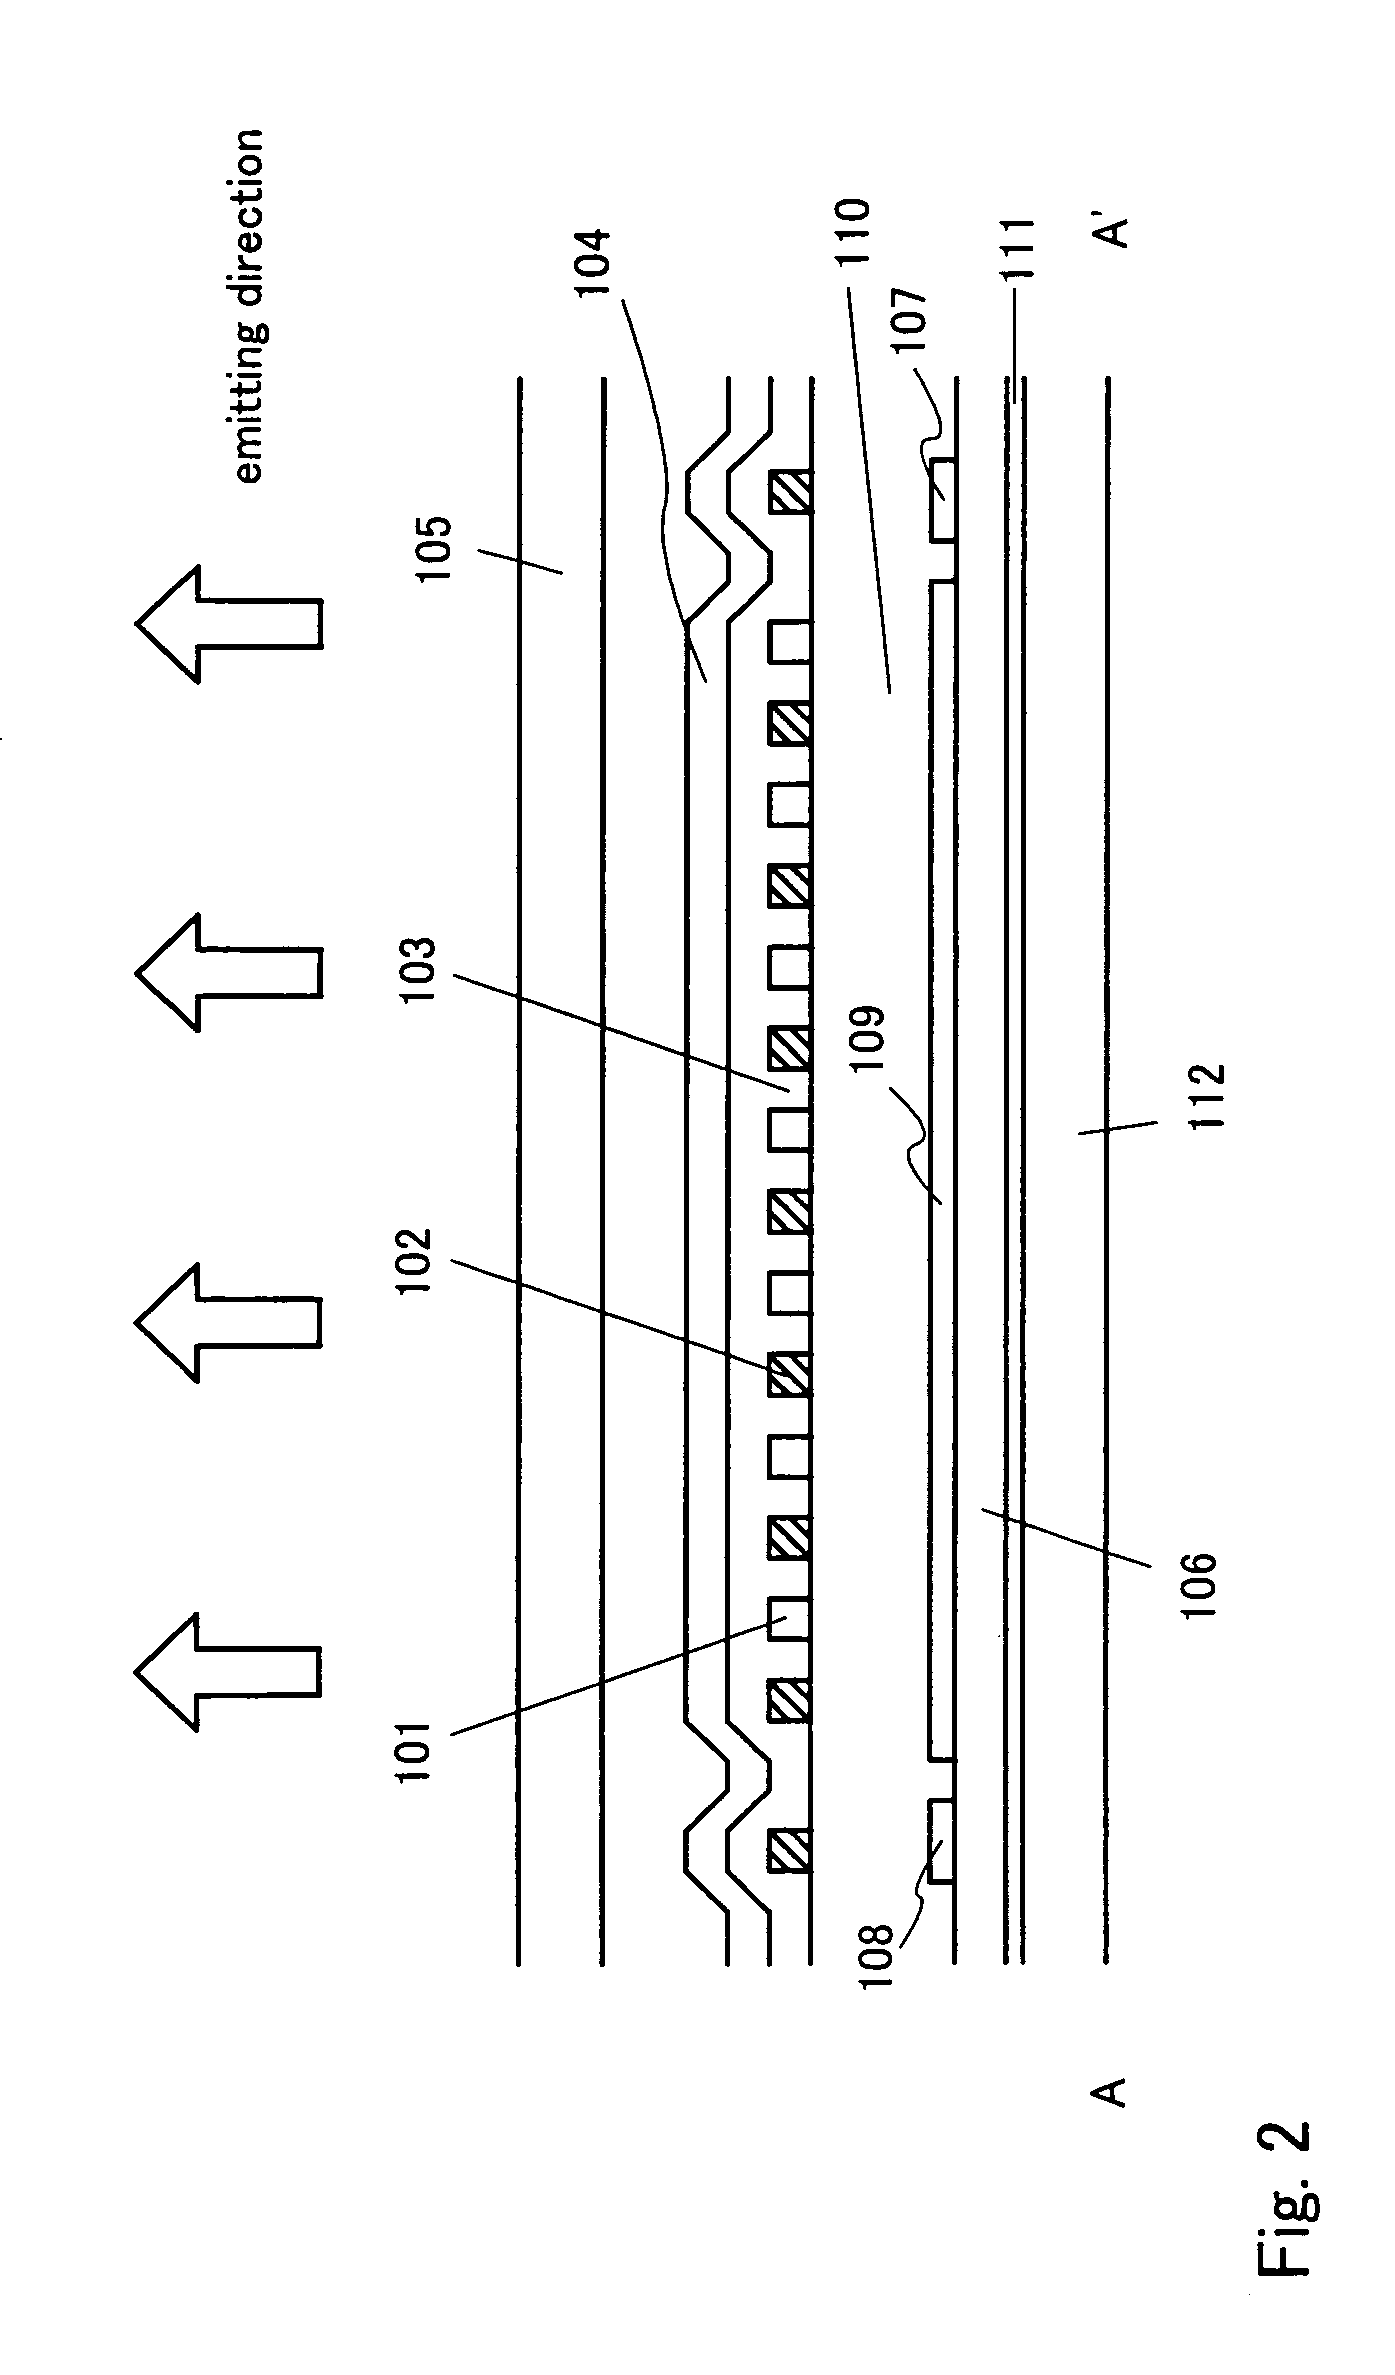 Light emitting device having both electrodes formed on the insulating layer